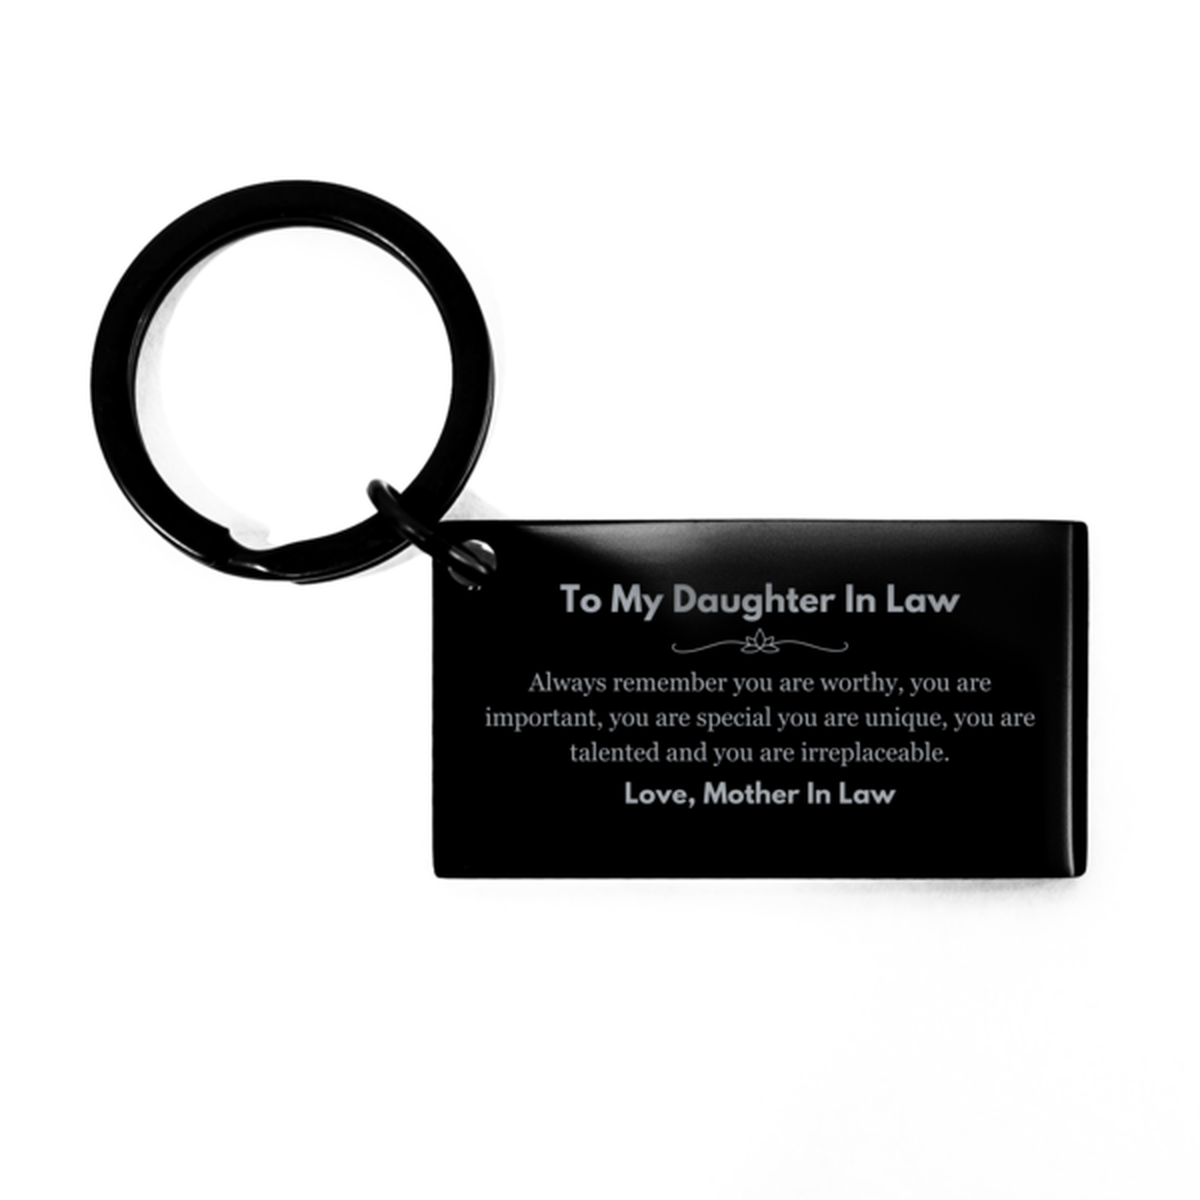 Daughter In Law Birthday Gifts from Mother In Law, Inspirational Keychain for Daughter In Law Christmas Graduation Gifts for Daughter In Law Always remember you are worthy, you are important. Love, Mother In Law